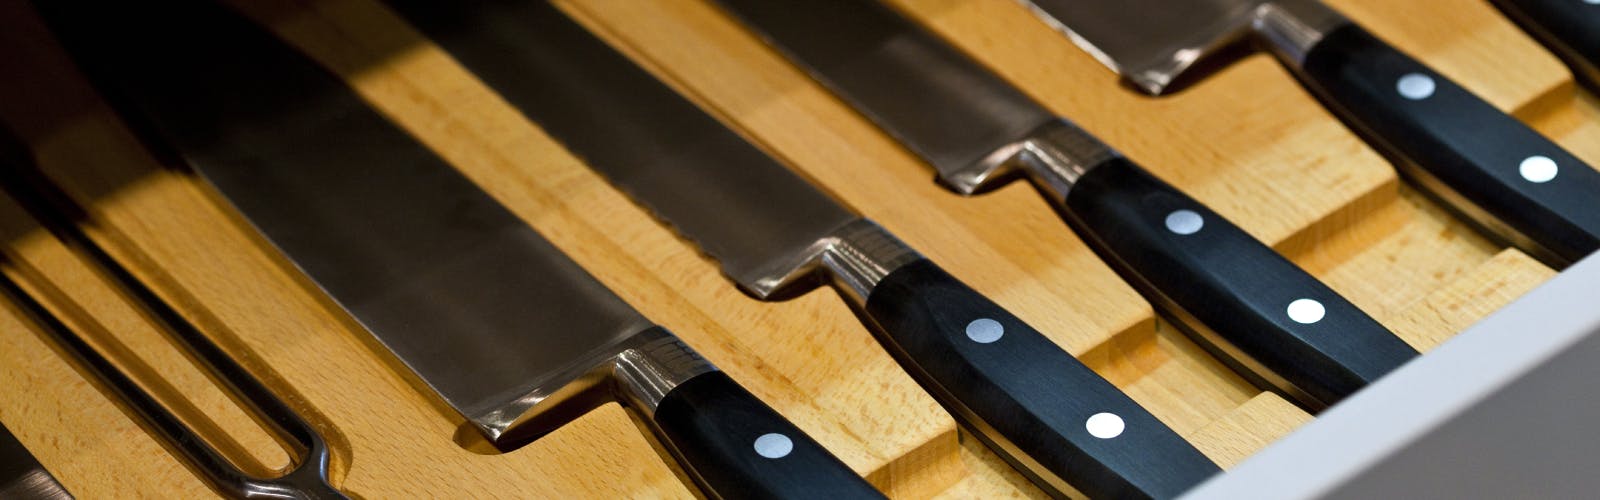 An Expert Guide to Knife Sets